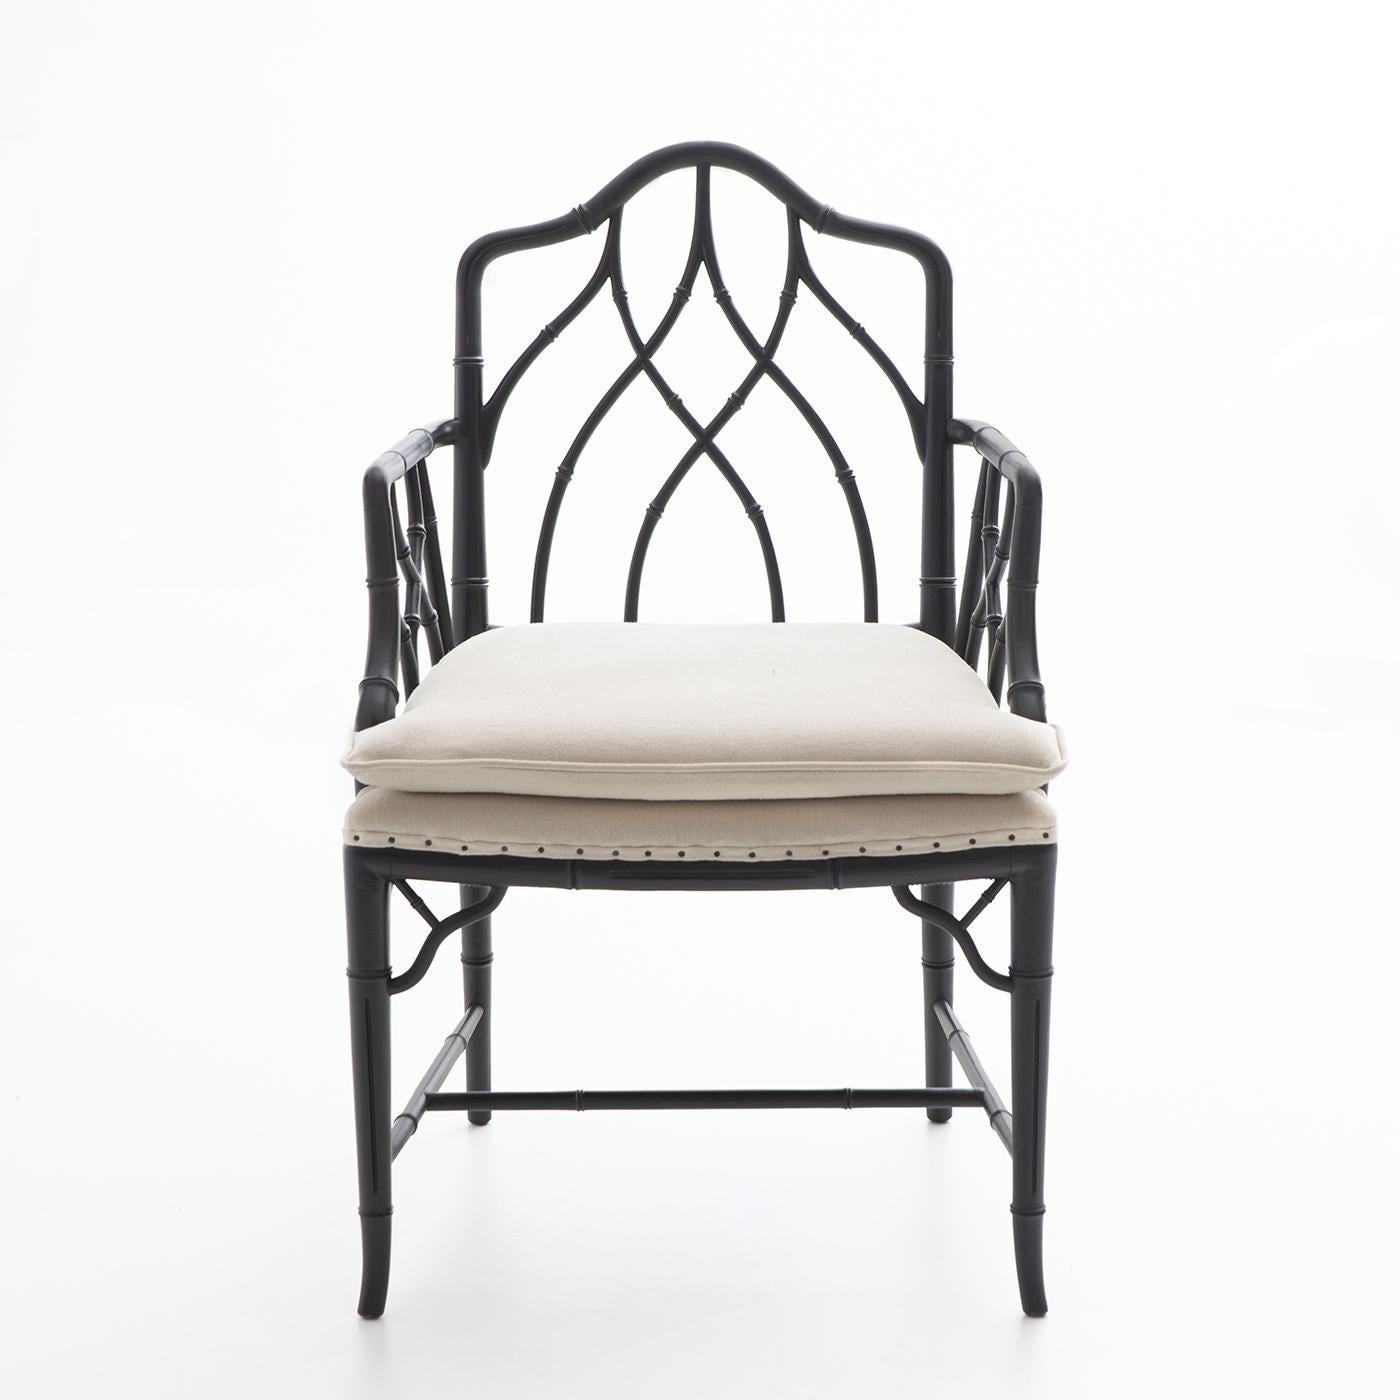 This superb, 19th century-style armchair stands out for its graceful combination of materials and artisan techniques. A sinuous array of branches defines the beech frame, which boasts a singular bamboo-like design peeled and lacquered in black to